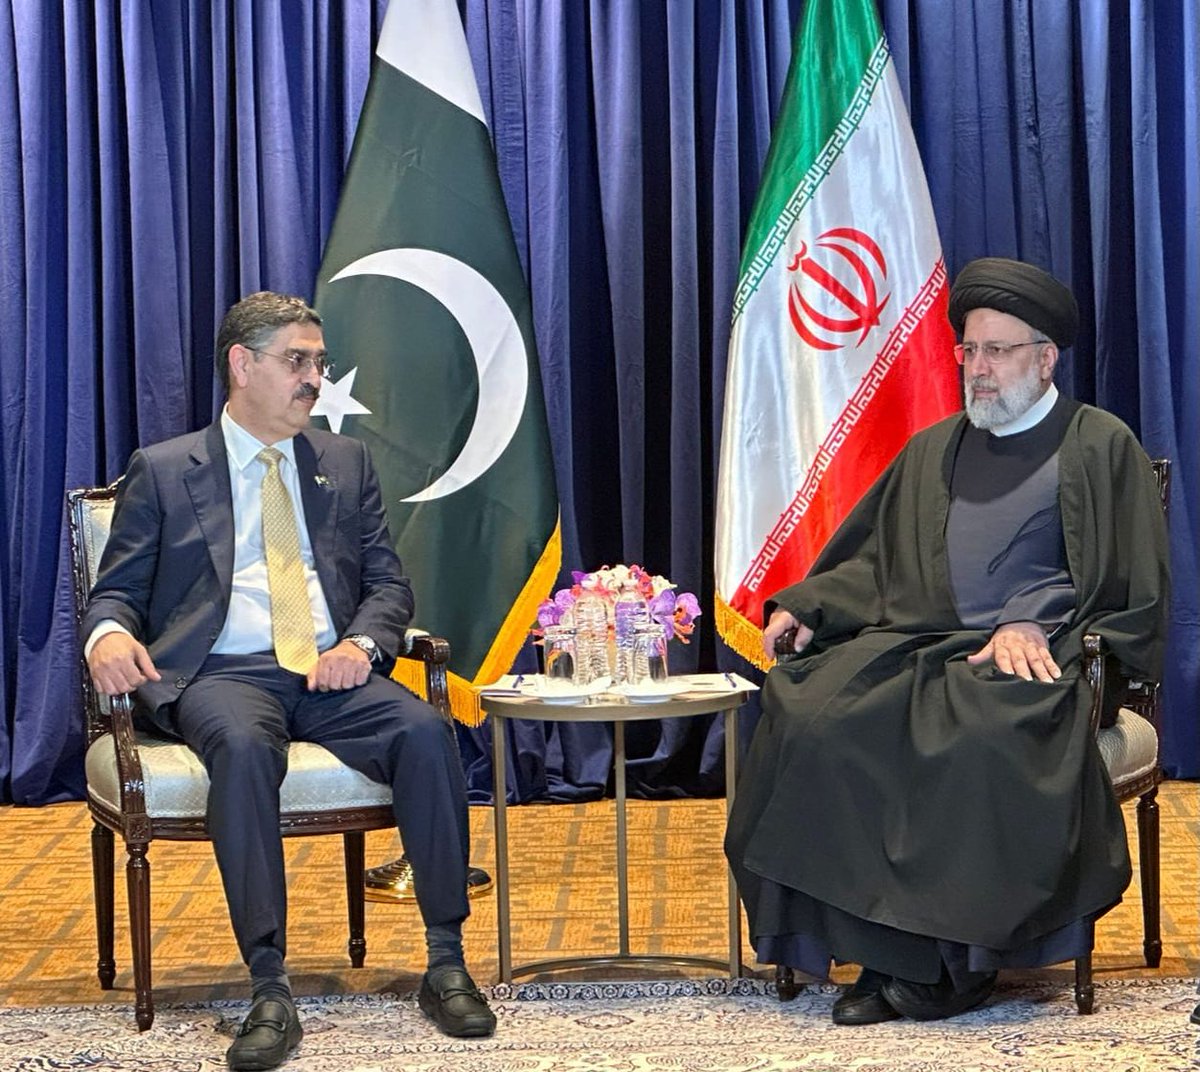 Caretaker Prime Minister Anwaar-ul-Haq Kakar met with the President of the Islamic Republic of Iran H.E Ebrahim Raisi, today, on the sidelines of the 78th session of the United Nations General Assembly being held in New York. #PMKakarAtUNGA #UNGA78